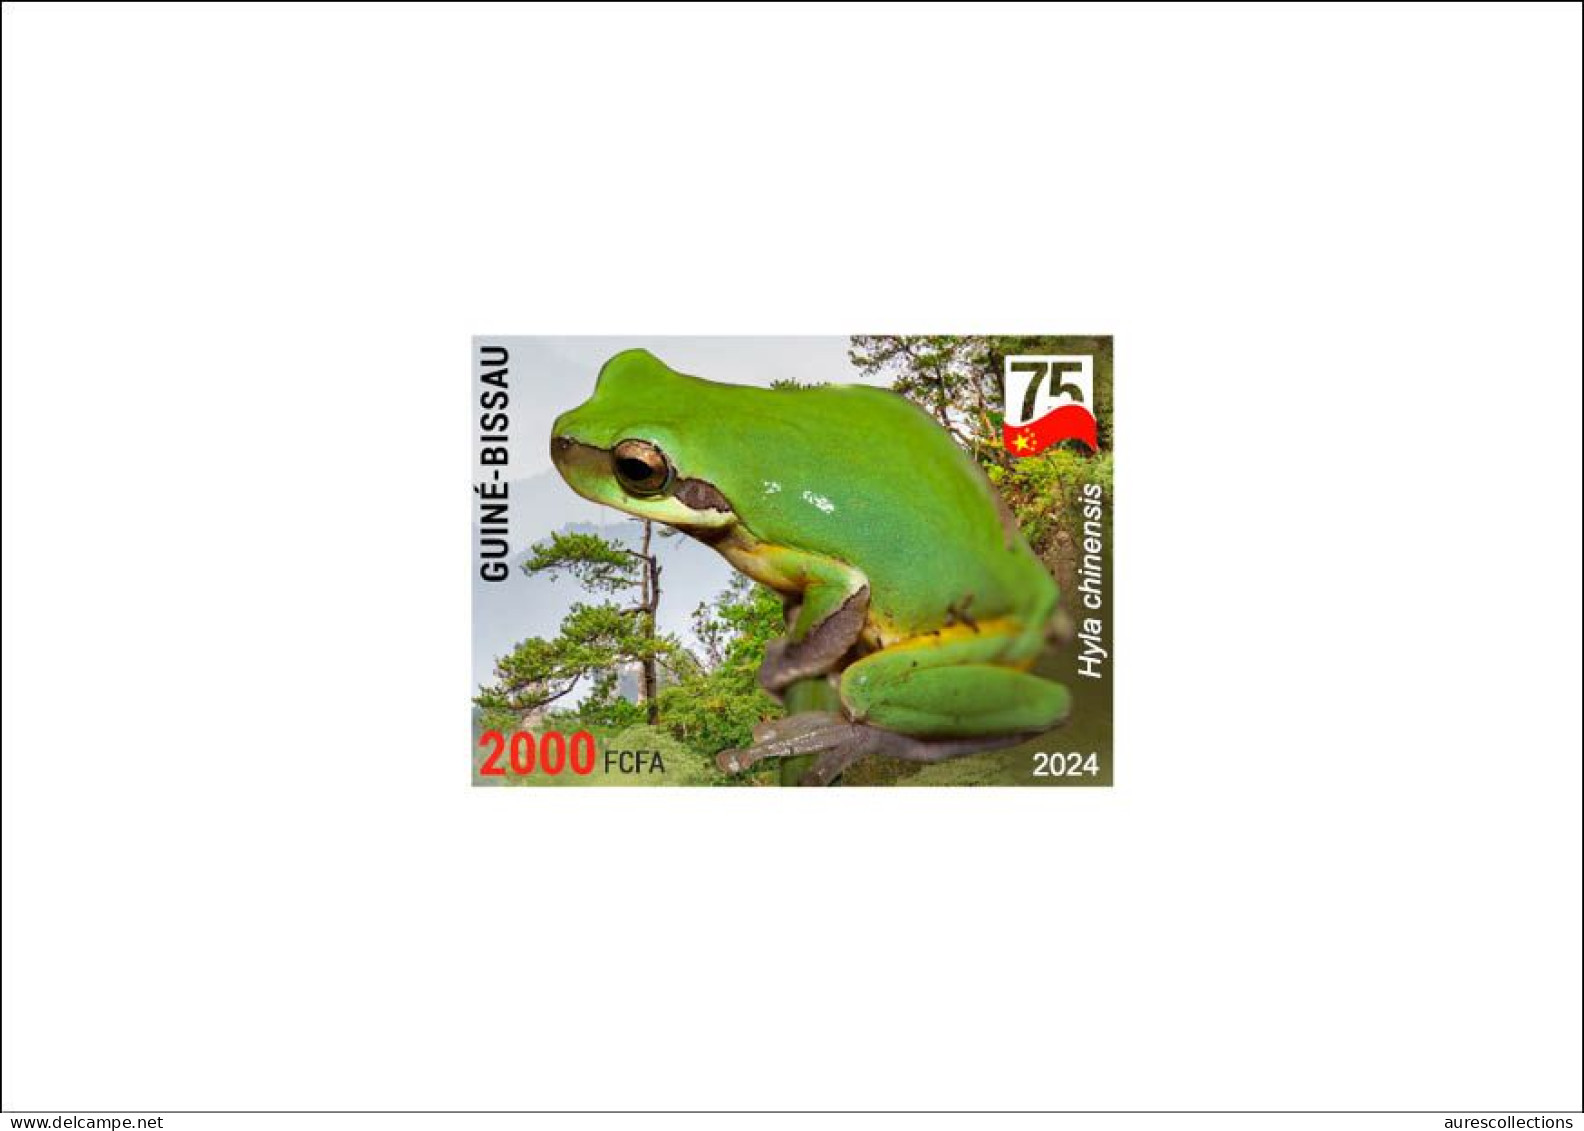 GUINEA BISSAU 2024 DELUXE PROOF - CHINA AMPHIBIANS & REPTILES - CHINESE TREE FROG FROGS GRENOUILLES - CHINA 75 ANNIV. - Frogs